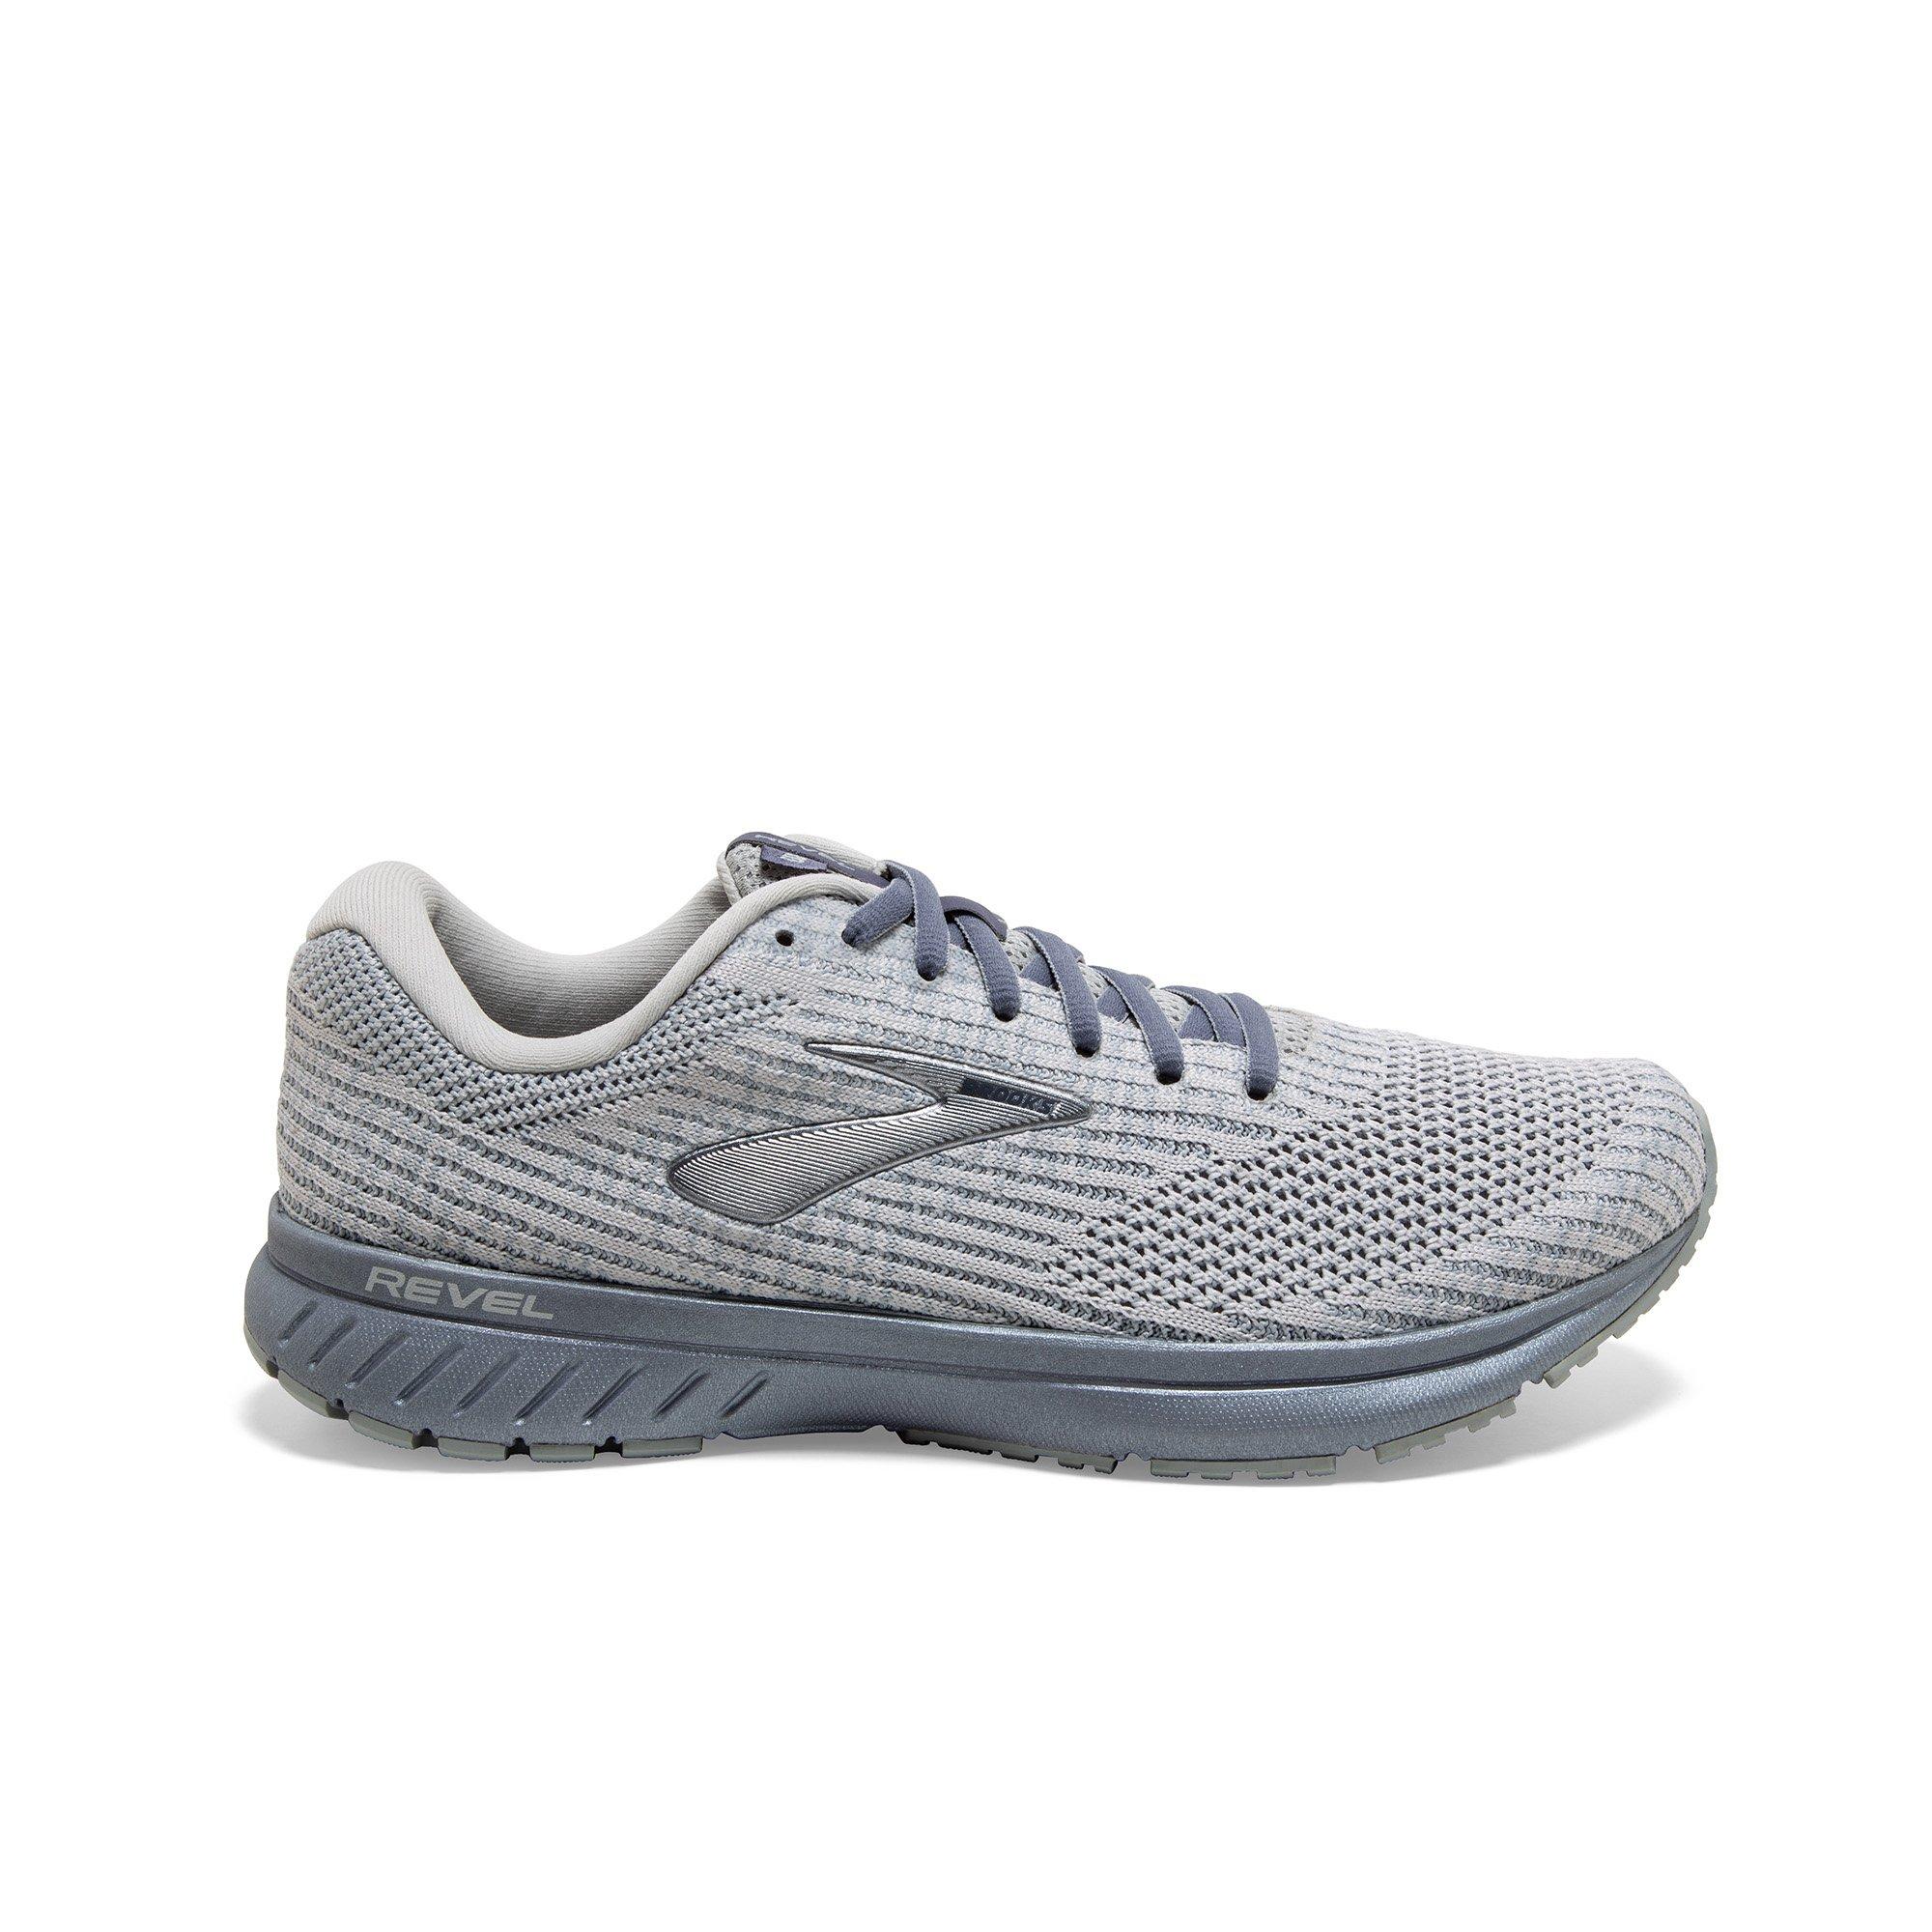 brooks running shoes military discount